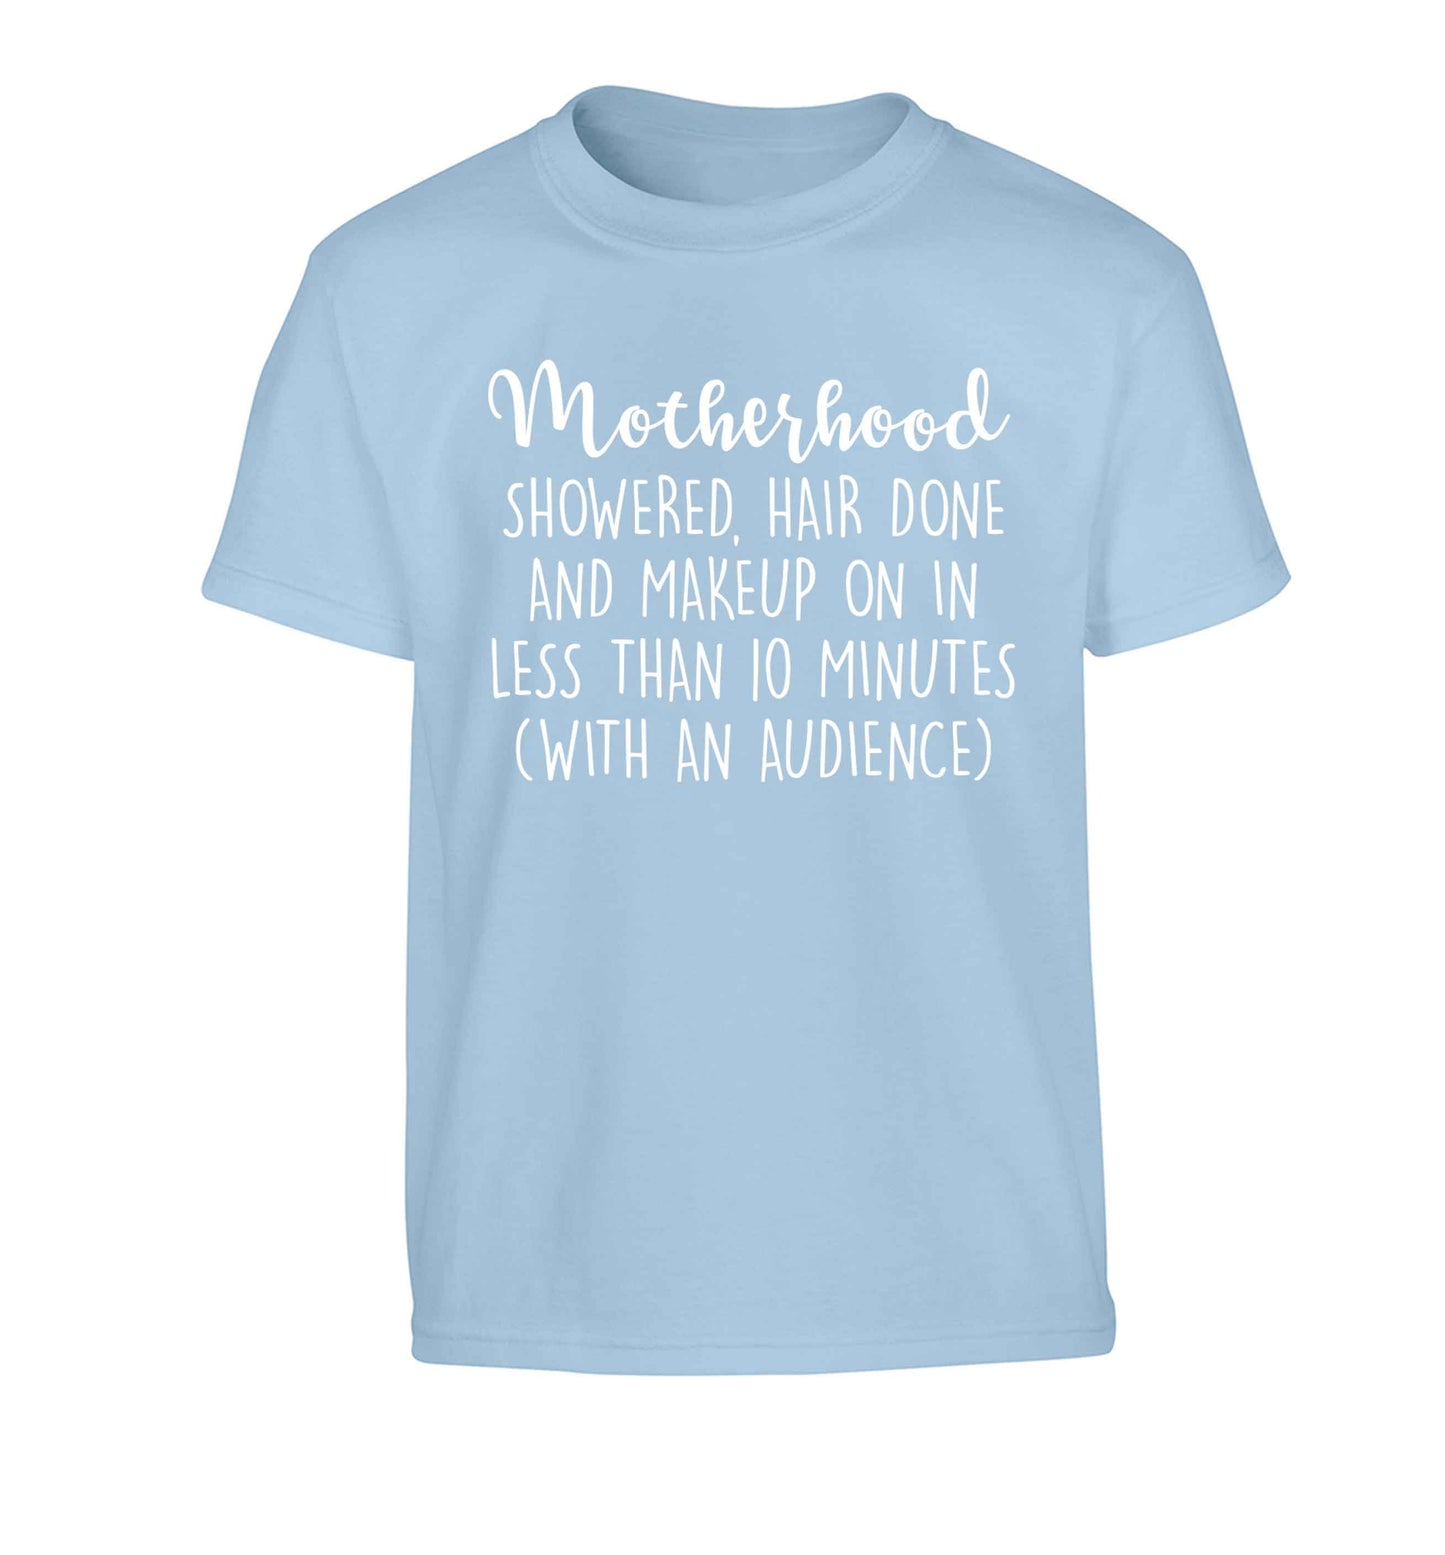 Motherhood, showered, hair done and makeup on Children's light blue Tshirt 12-13 Years